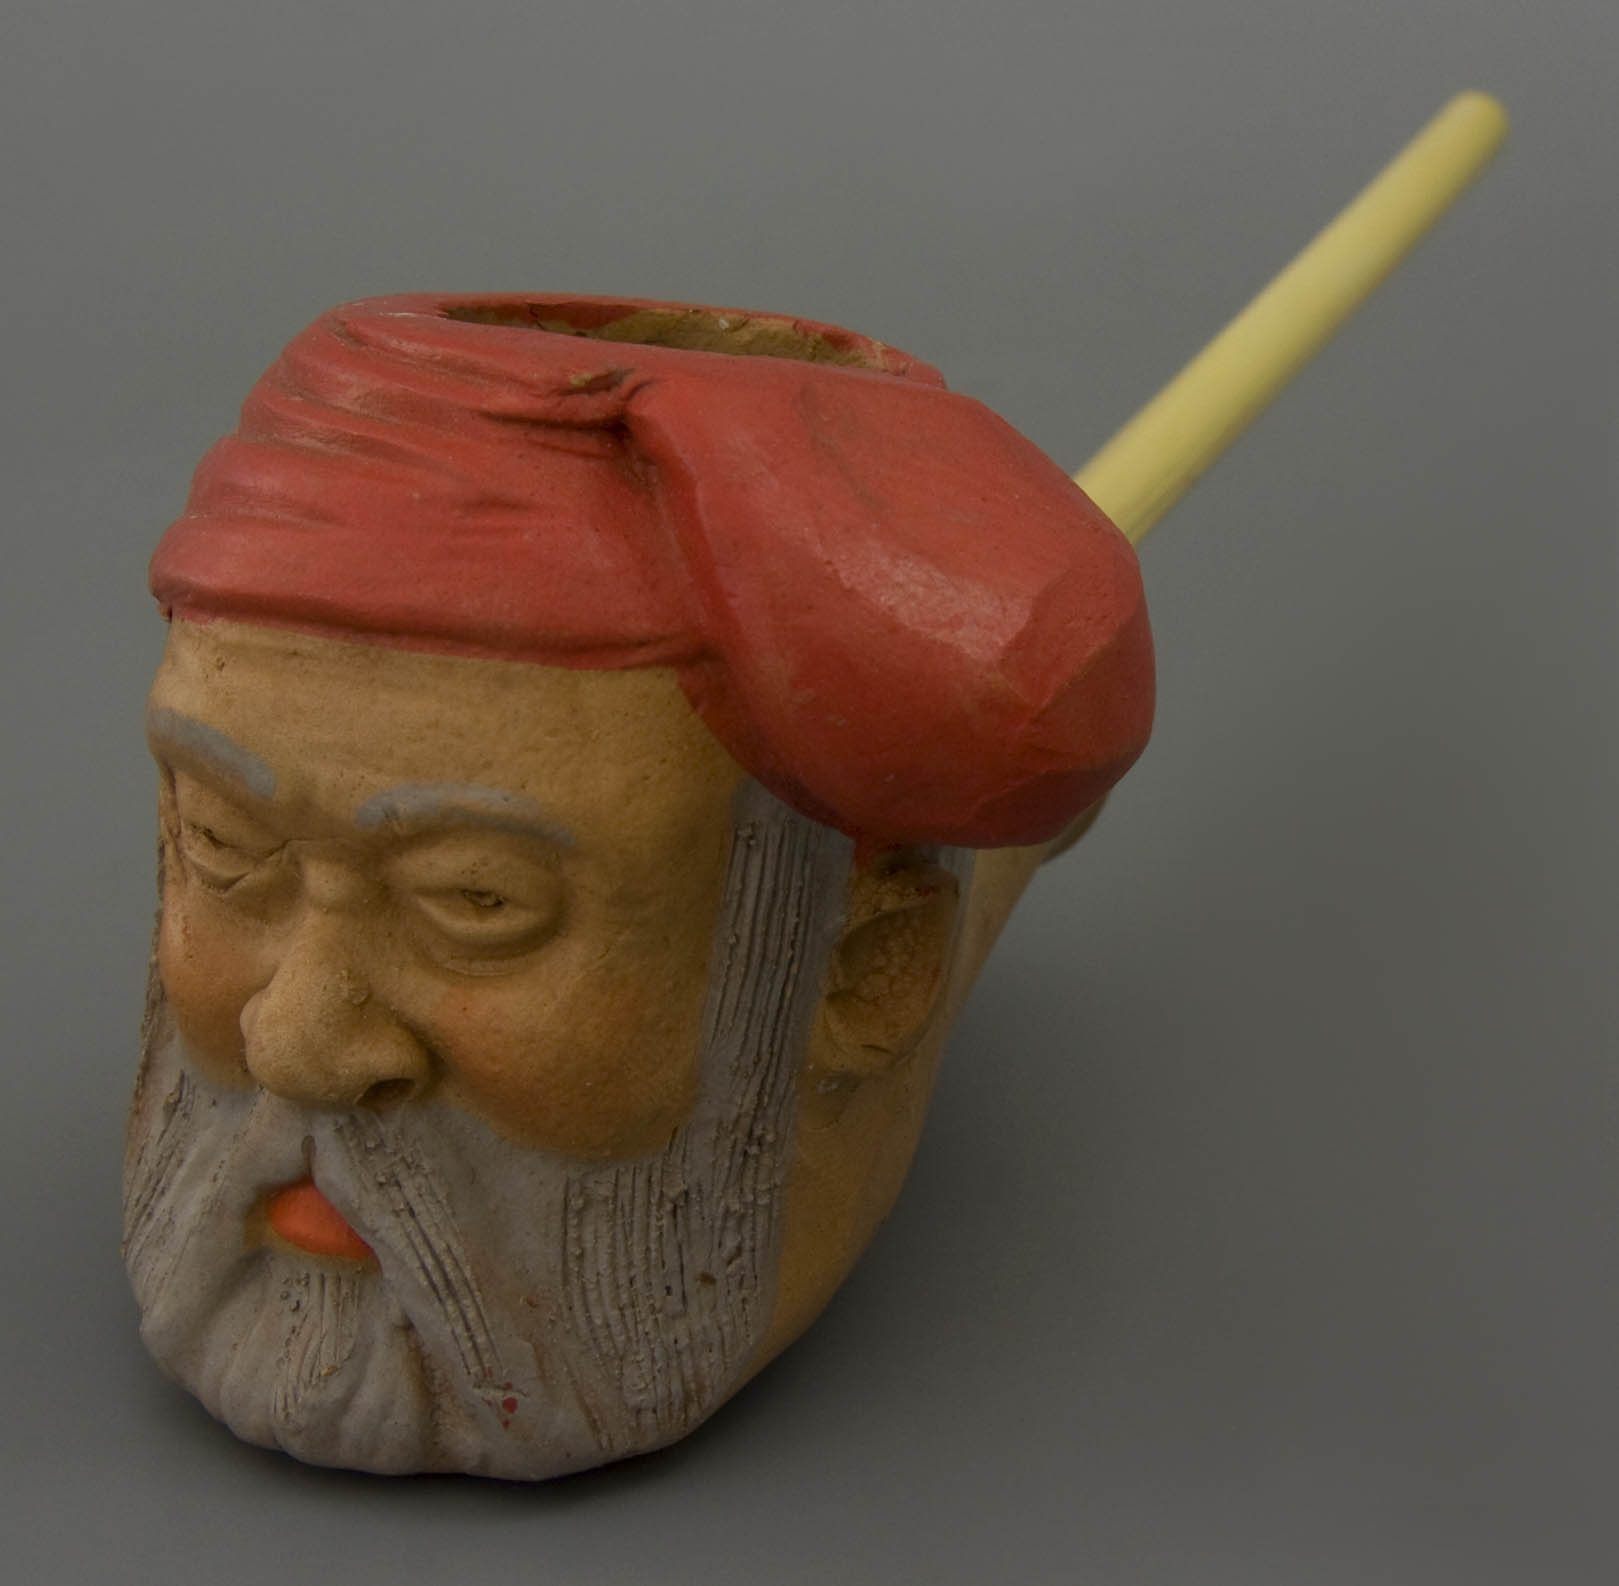 51-08.818-tobacco-pipe-hand-shaped-man-3